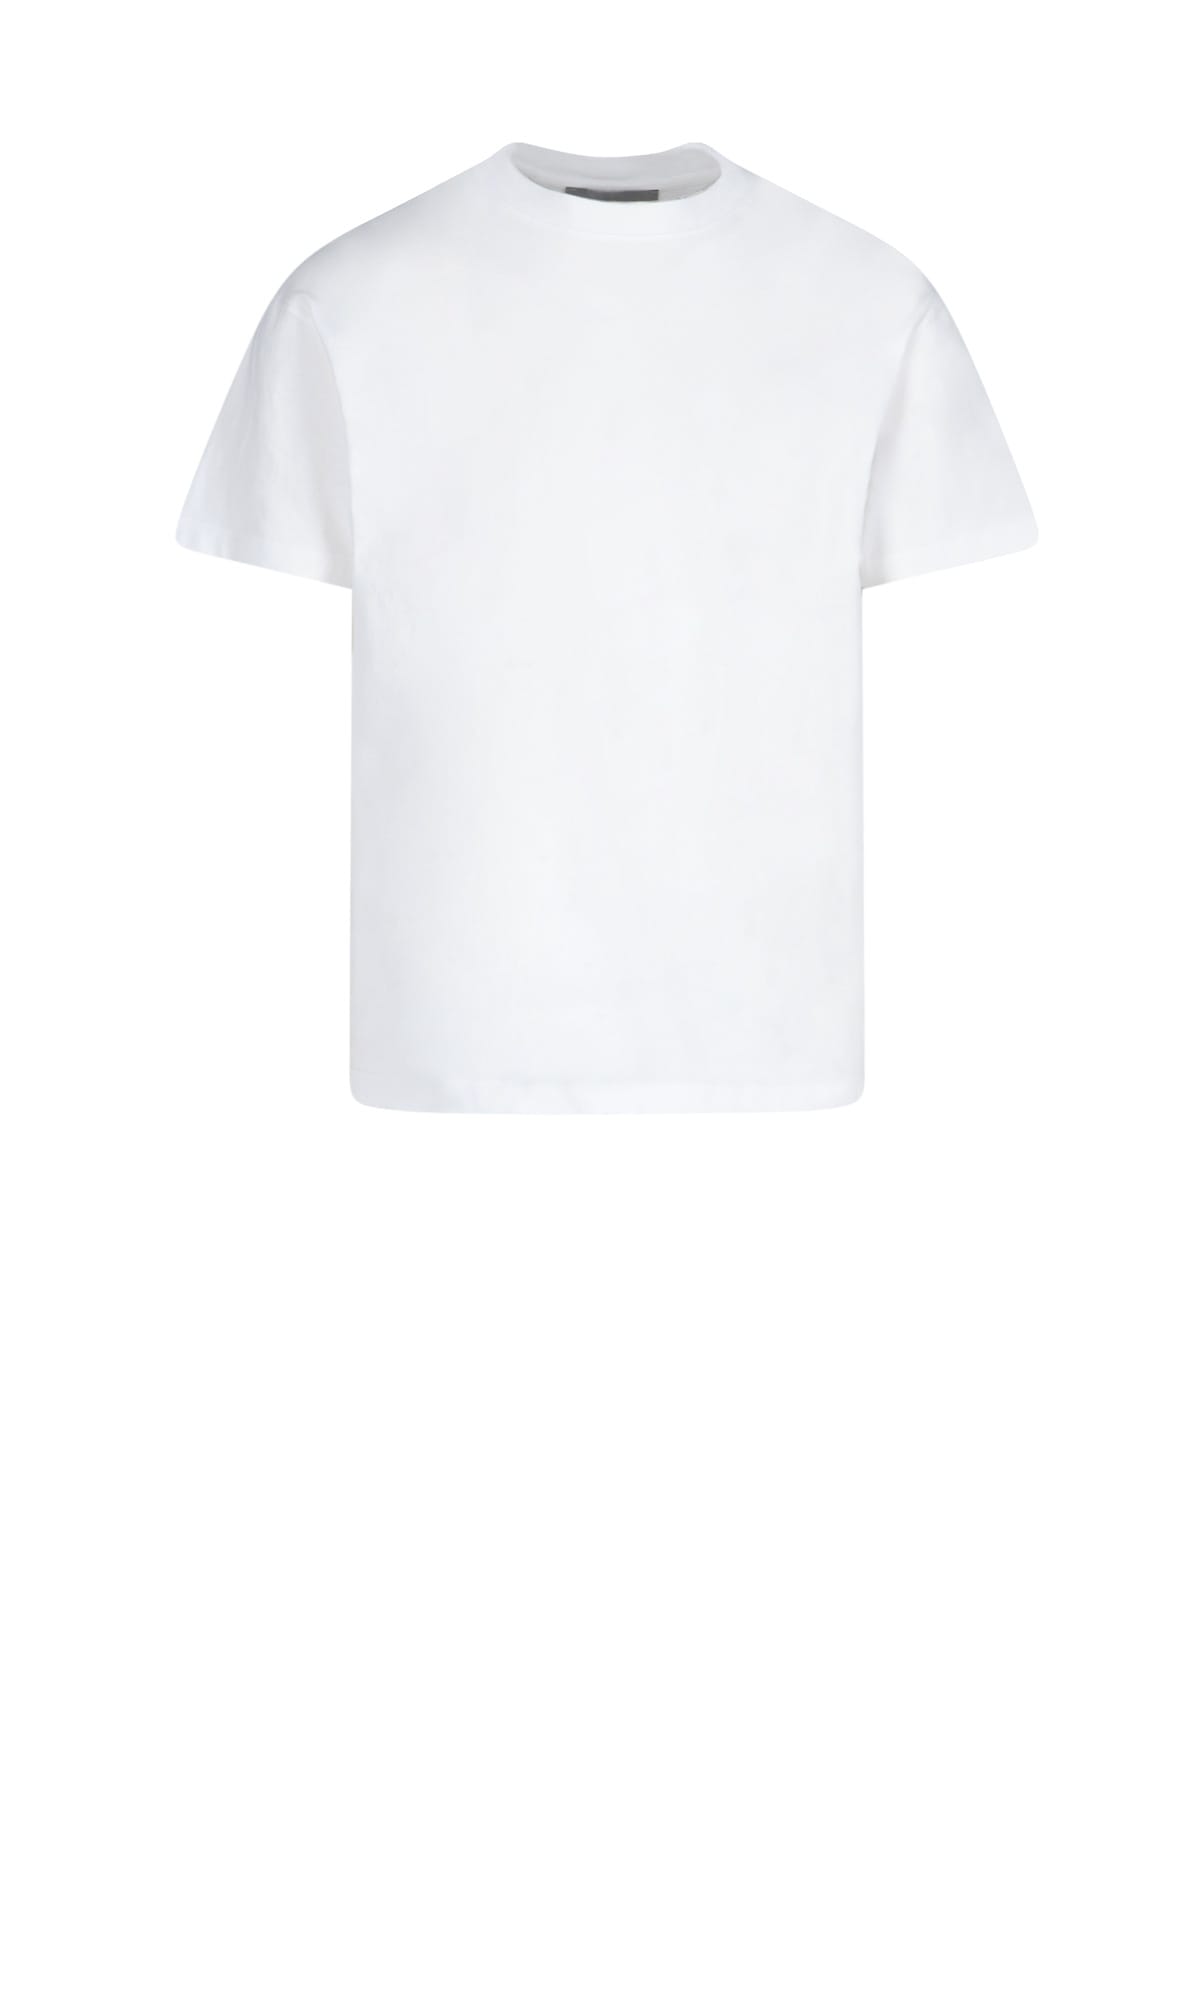 A-COLD-WALL* T-SHIRT,ACWMTS039 WHITE